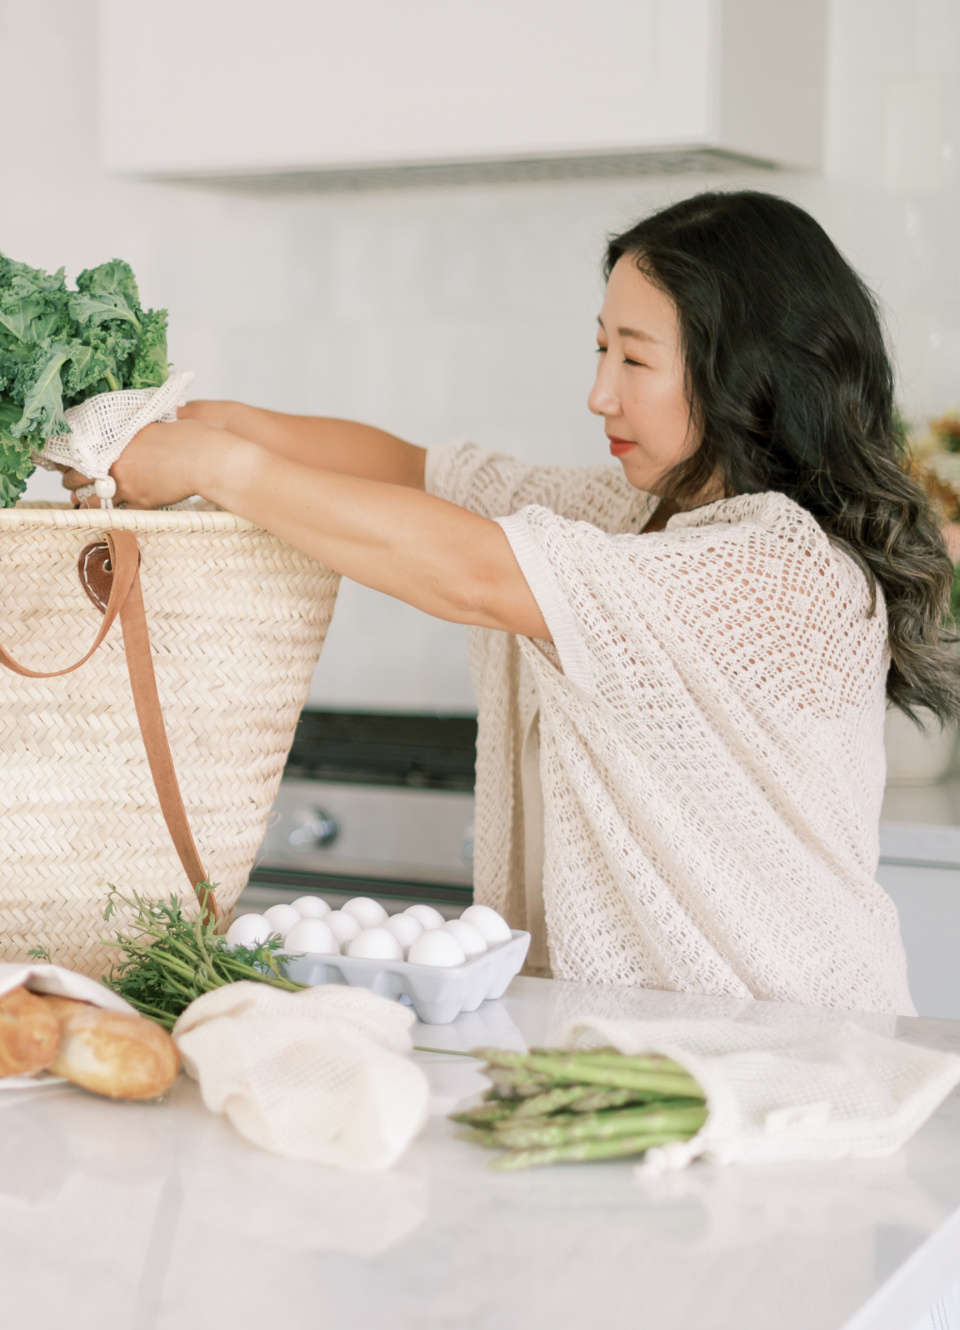 Nutrition Round Up: 12 Apps To Help You, Best Nutrition Apps, Asian woman unloading healthy groceries, keep track of calories, track healthy eating, track eating habits